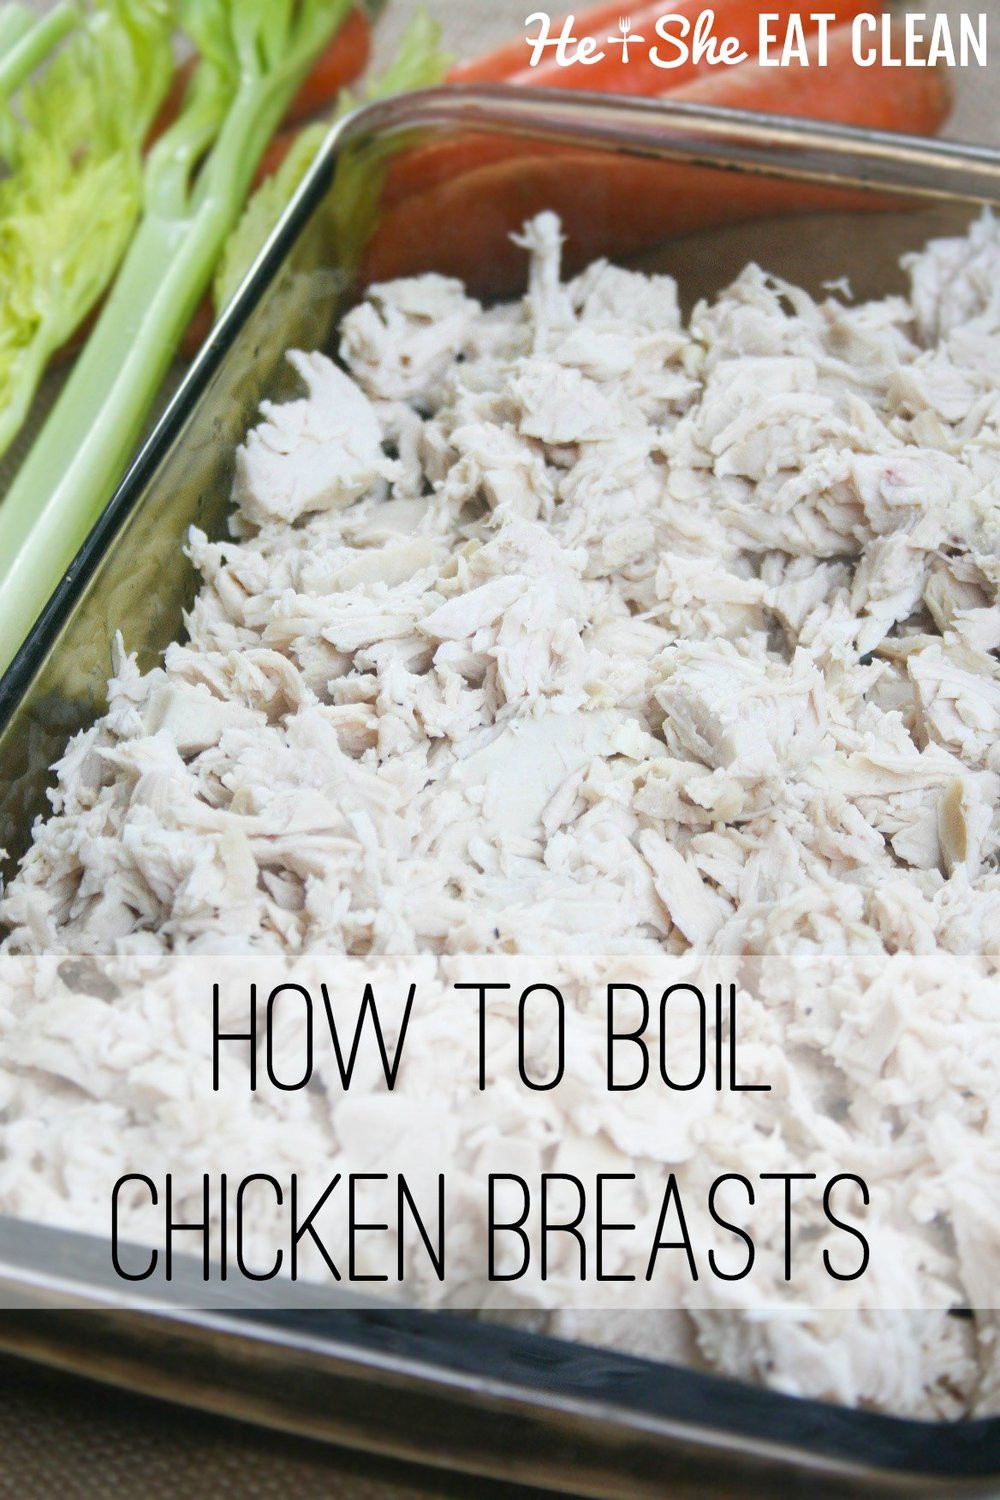 Boiling Chicken Breasts
 How to Boil Chicken Breasts